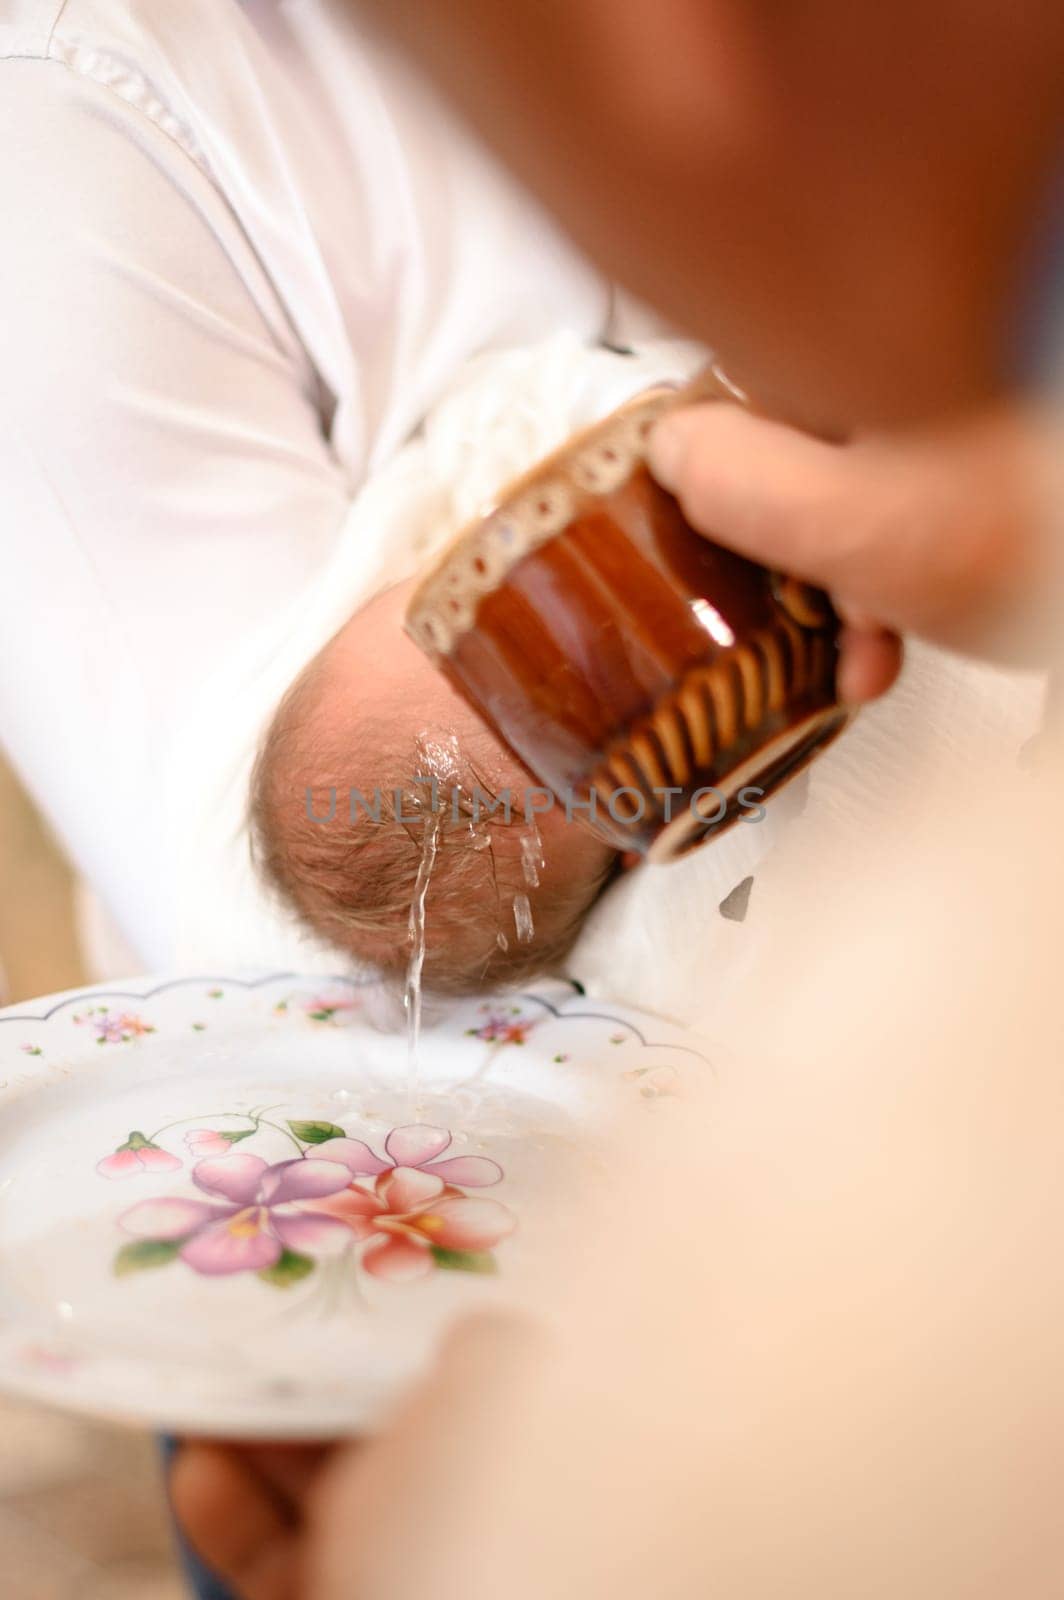 A priest pours water on the head of a small child during the Christian rite of baptism in the church, the baptism of an infant.